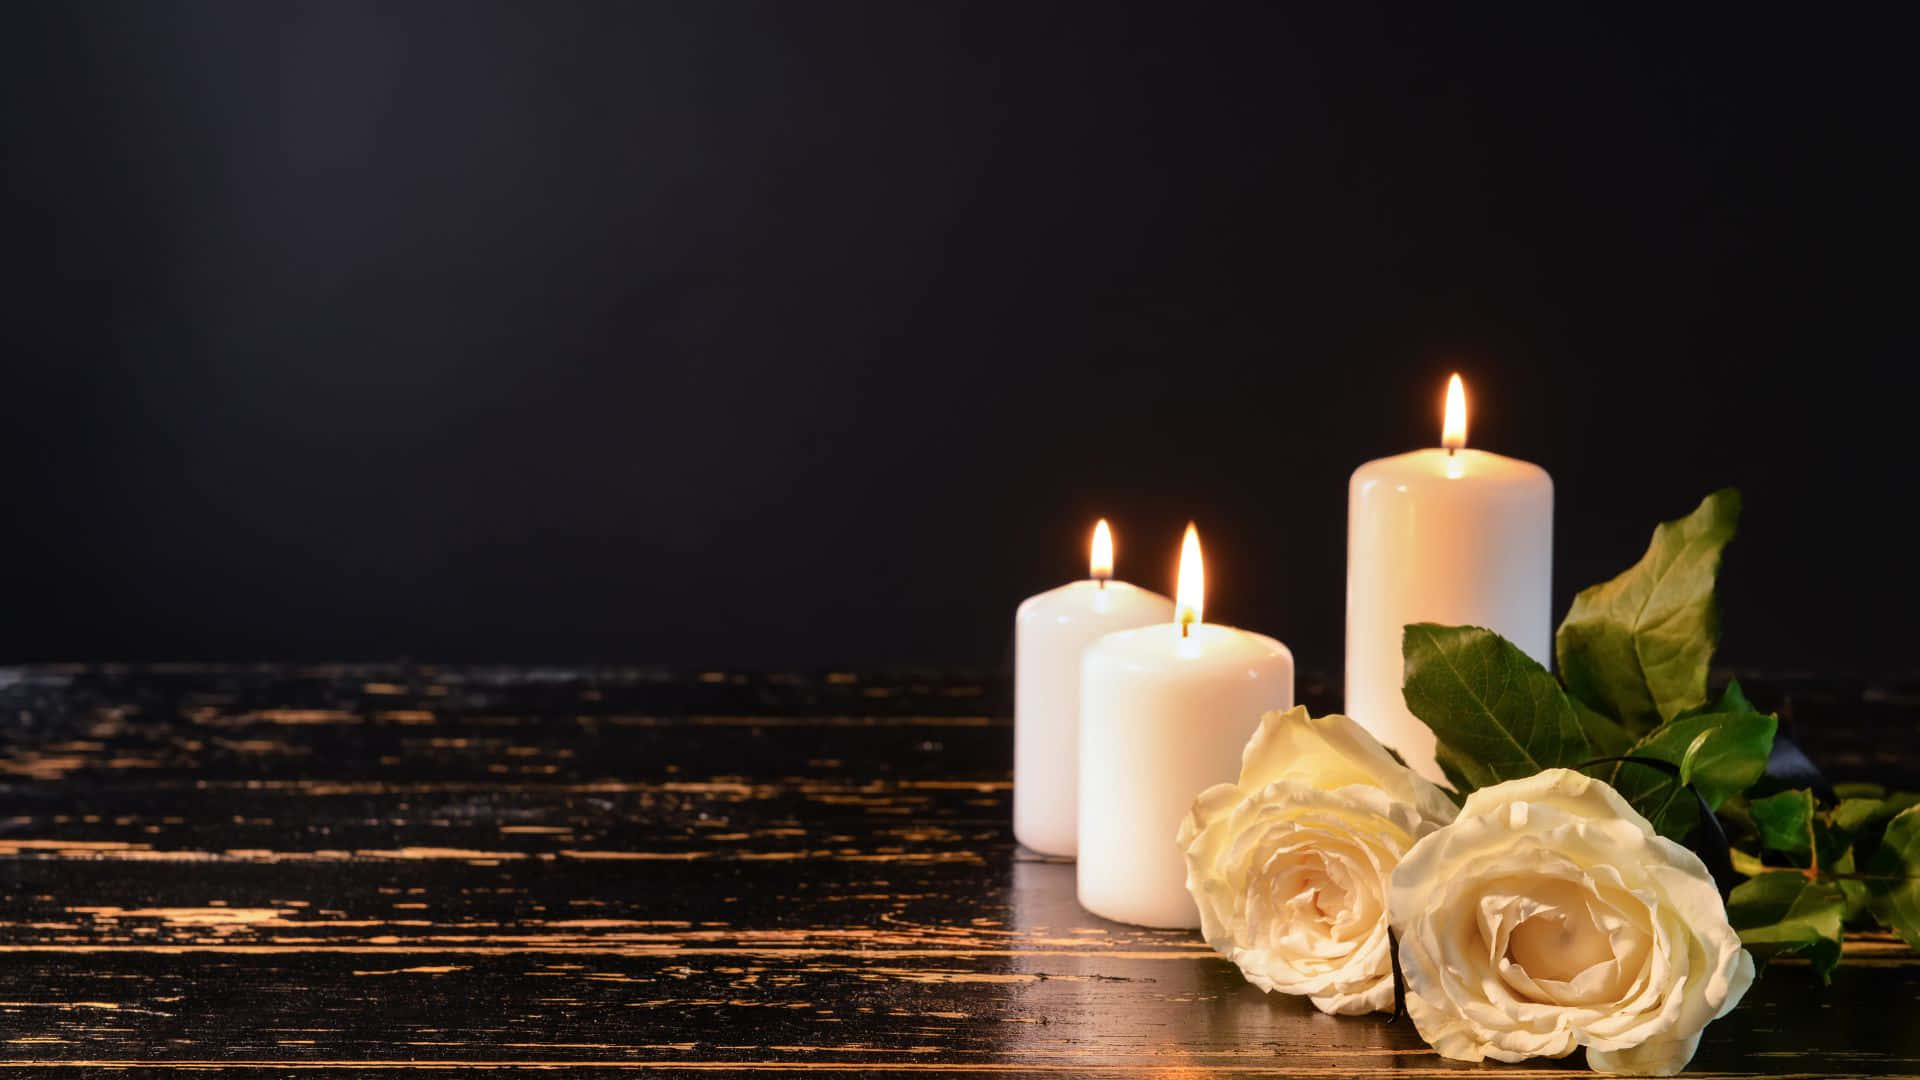 Two white pillar candles flowers candles Spa Spa stones white Orchid HD  wallpaper  Wallpaperbetter